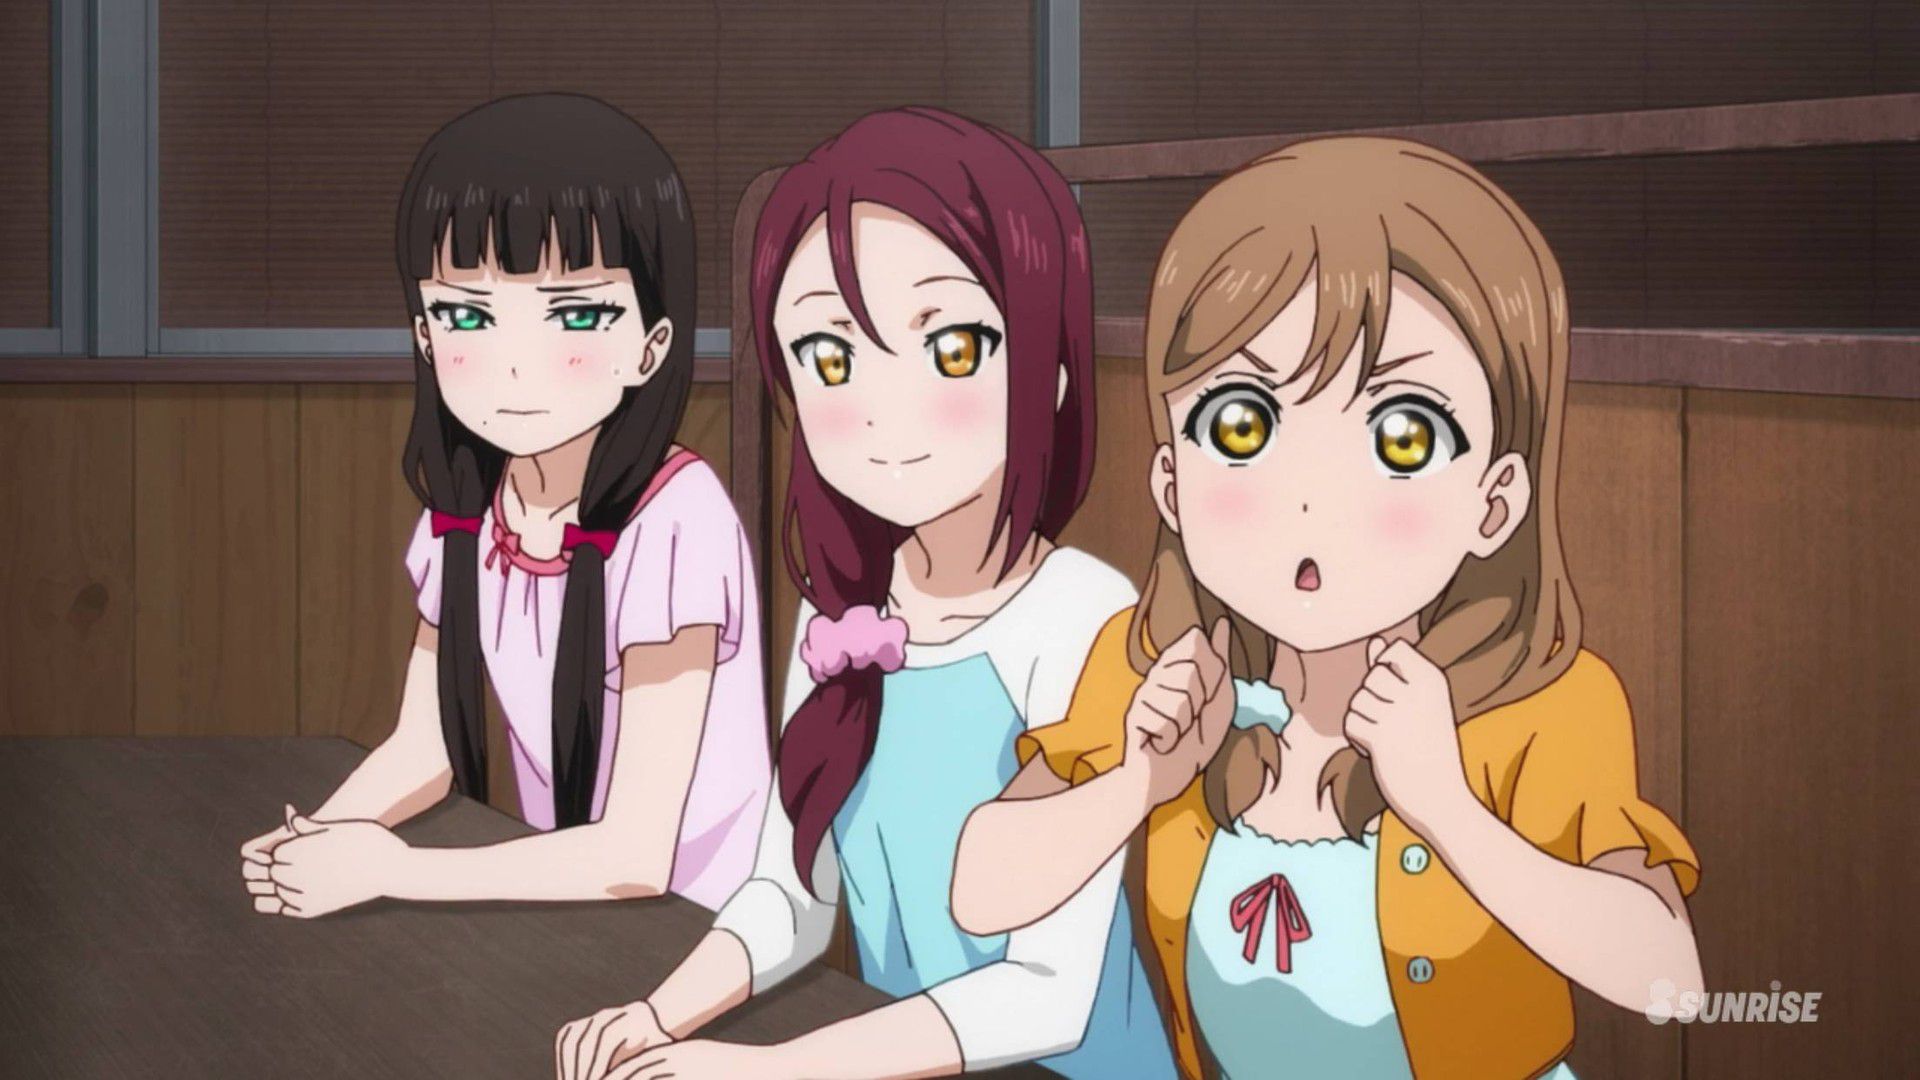 "Love live! Sunshine ' diamond-CHAN for this hairstyle like Guy wwwwwww 2